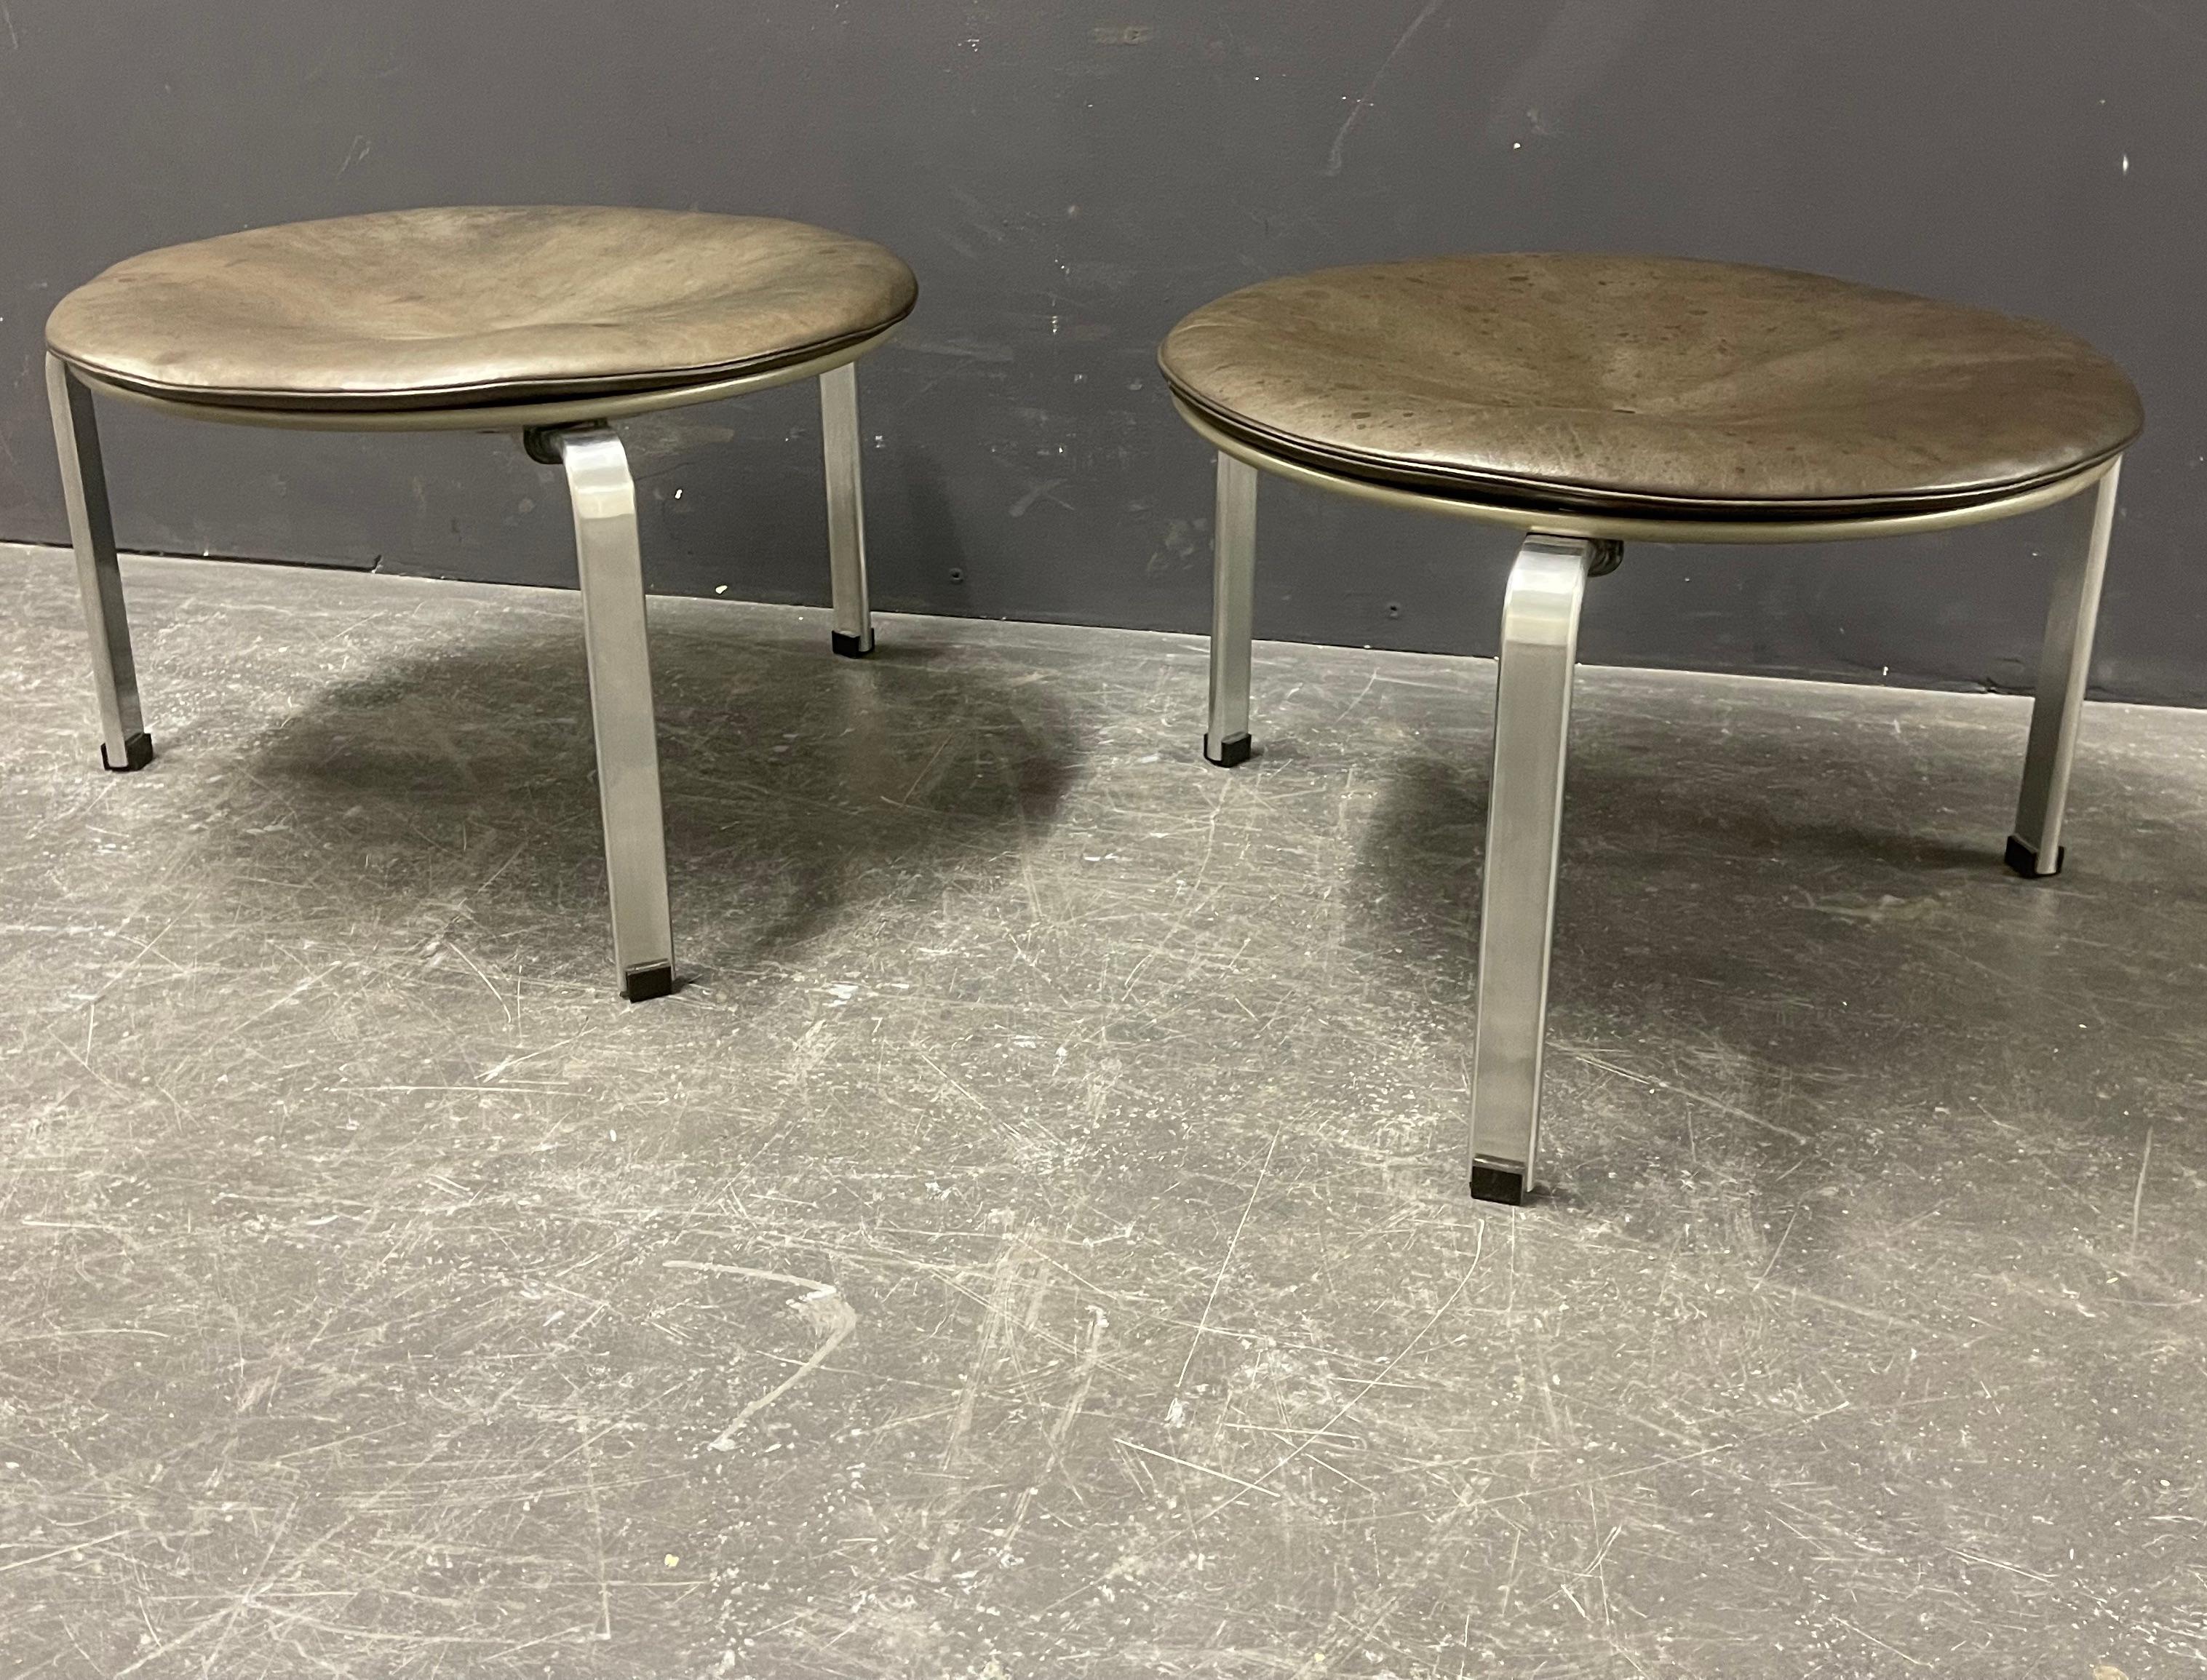 we are very happy to offer these two iconic and wonderful aged pk33 stools by poul kjaerholm. born in black leather these two have turned to a warm brown/grey. steel, plywood, paint and steel is like new. price is for one.